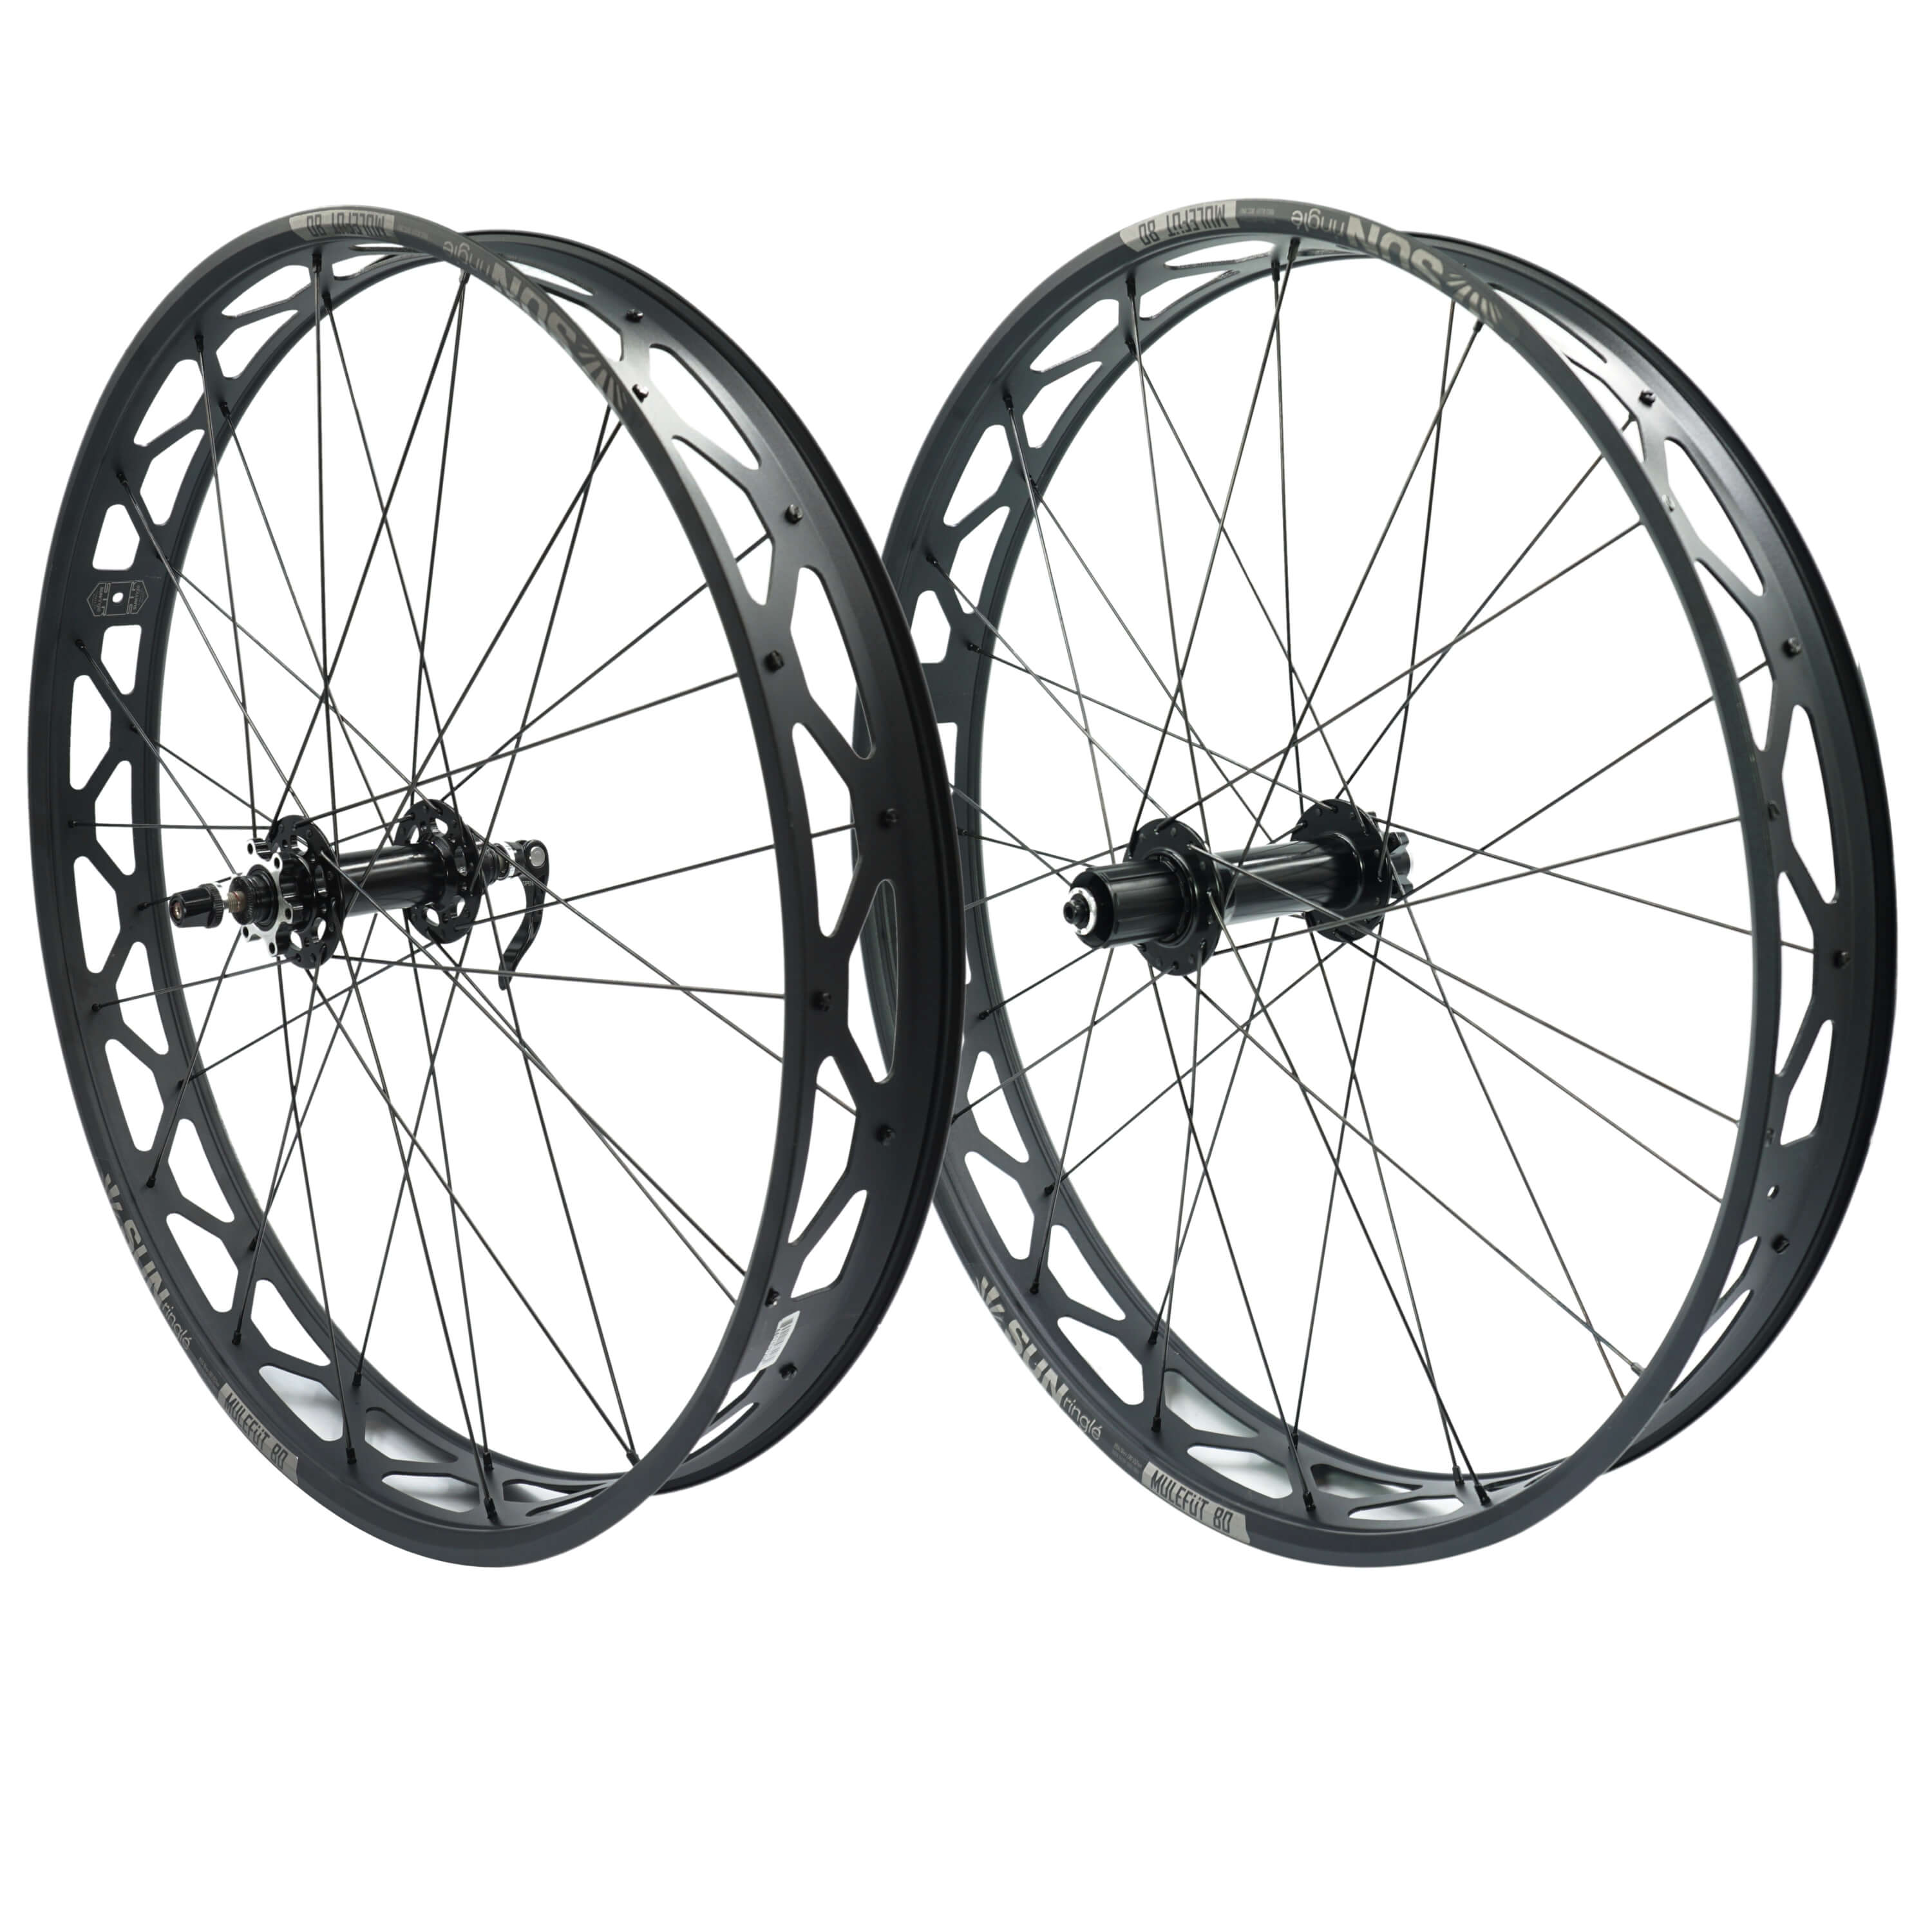 Sun Ringle 26" Mulefut 80SL V2 wheelset.  9x135 front and 10x190 rear with QR